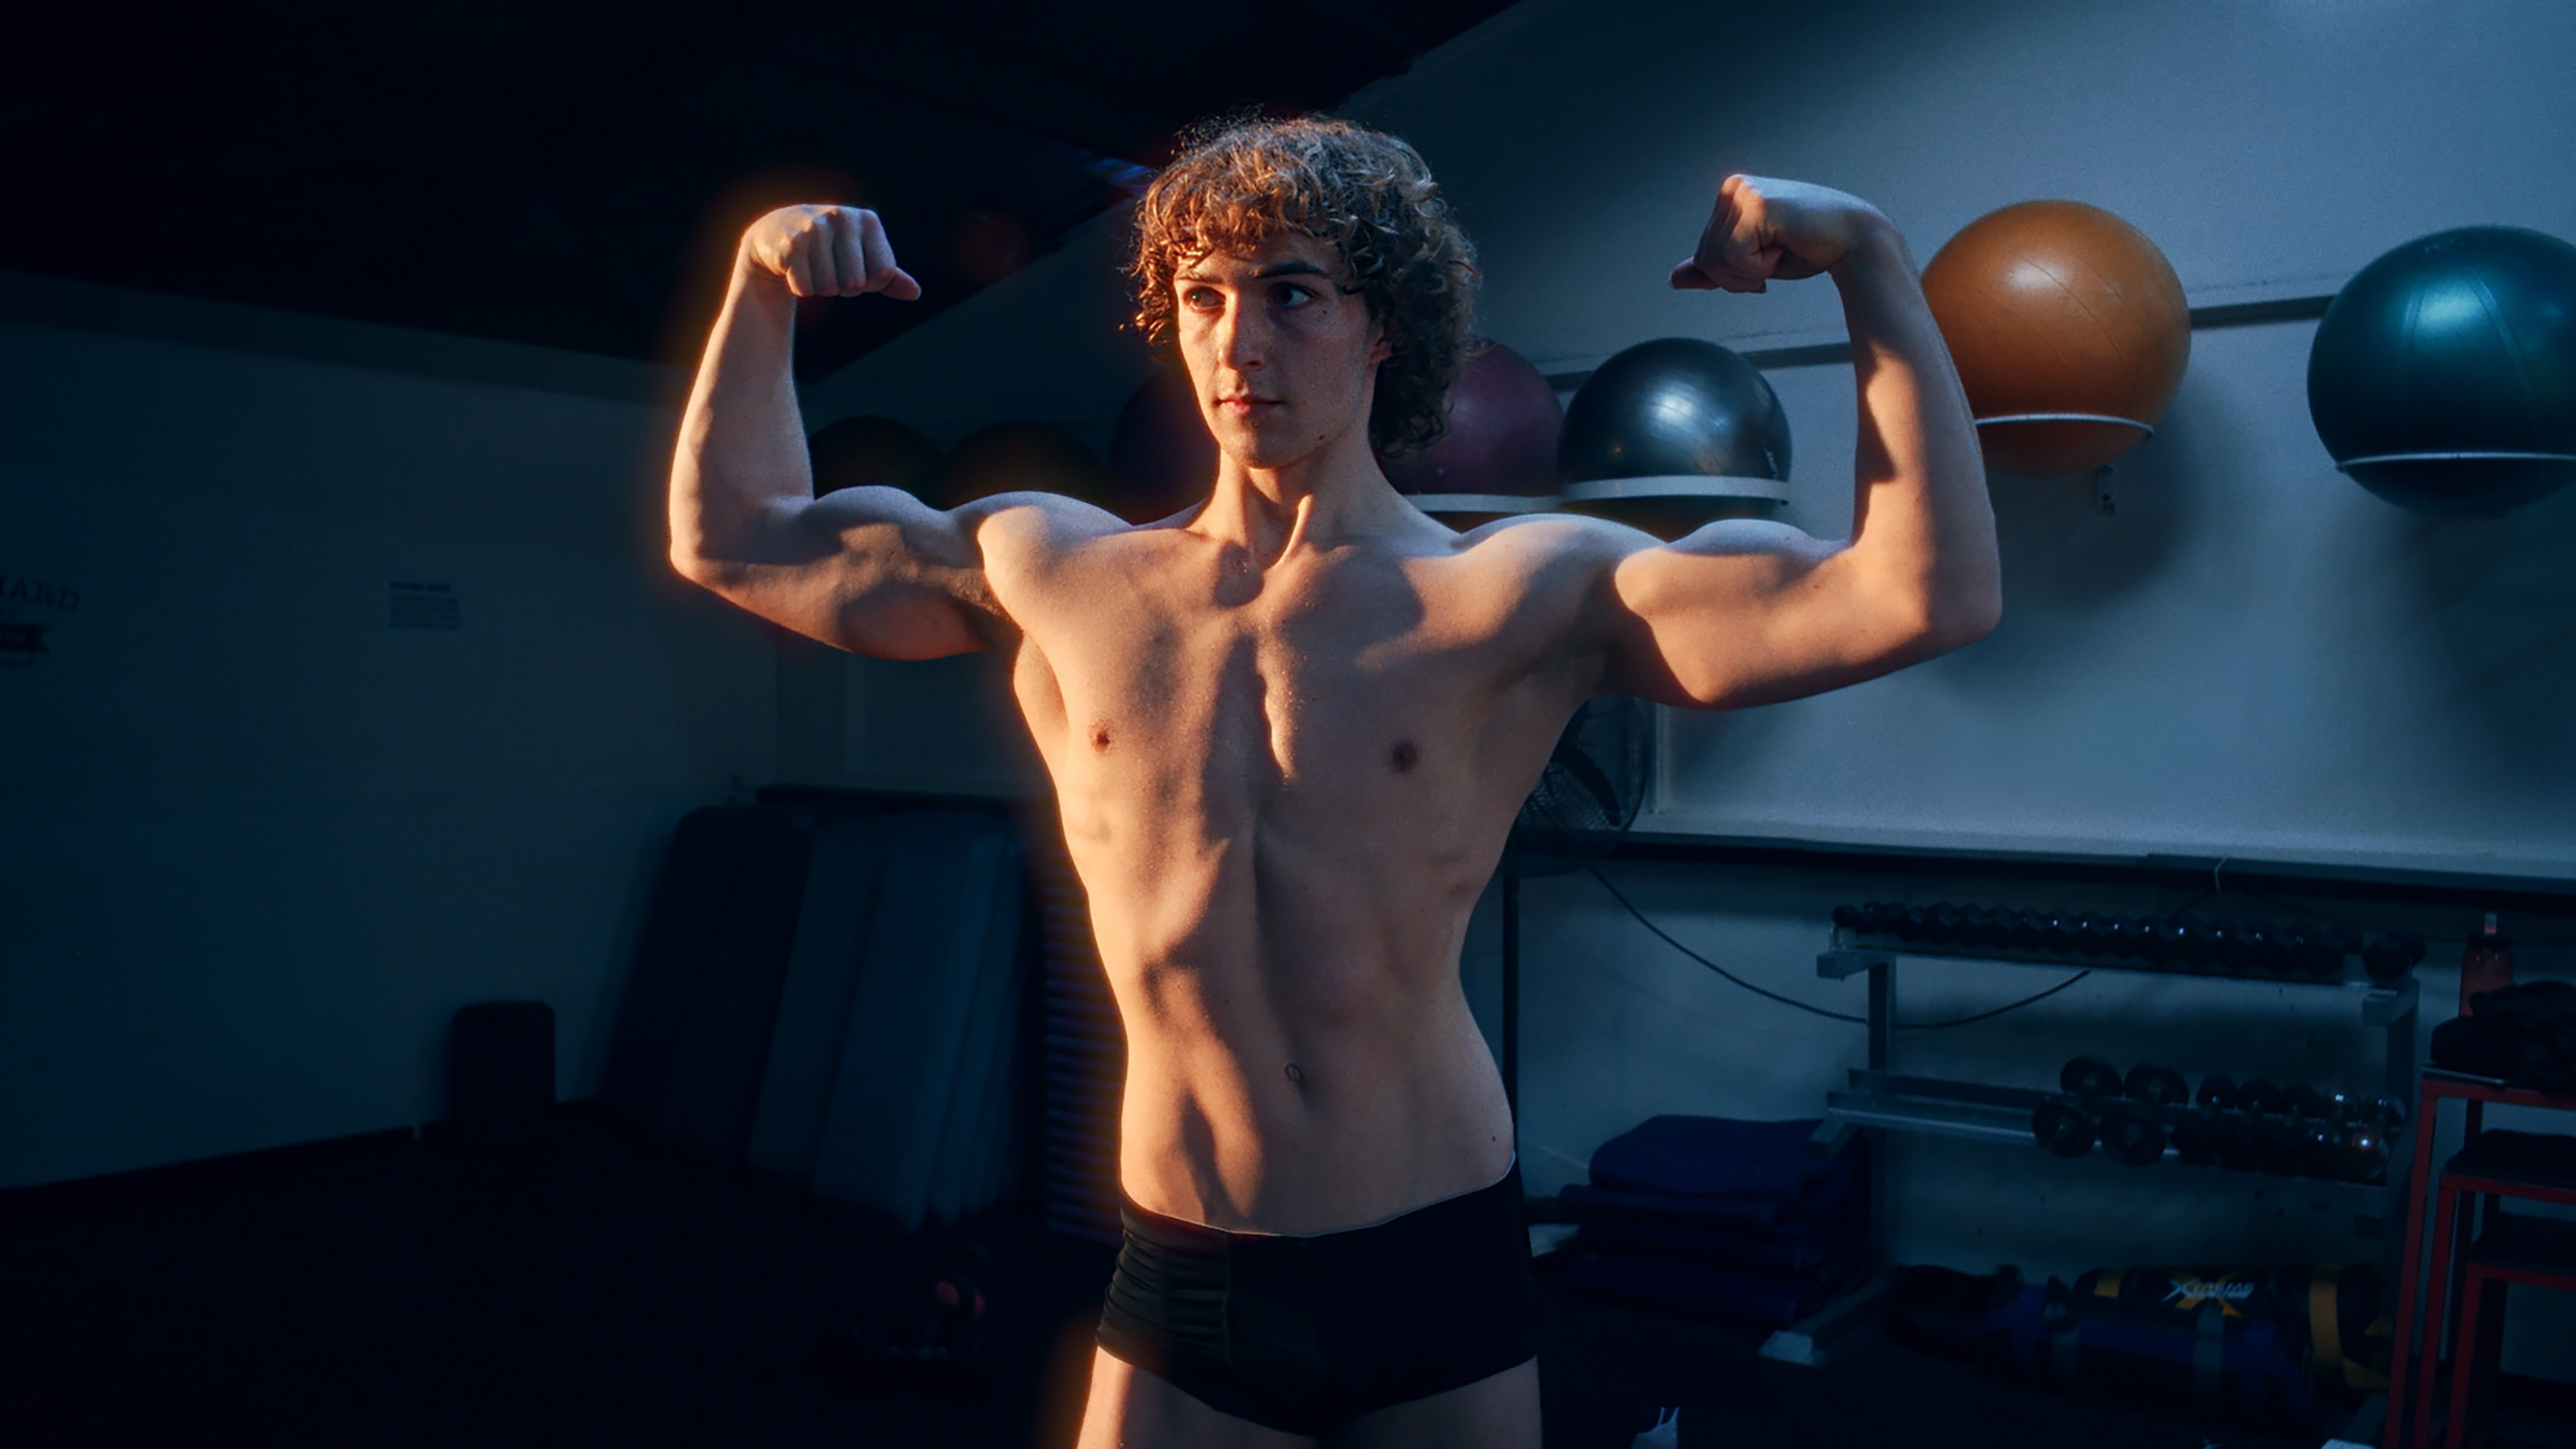 Loading Docs Shred - Teenage bodybuilder pushes himself to the limit, but at what cost?